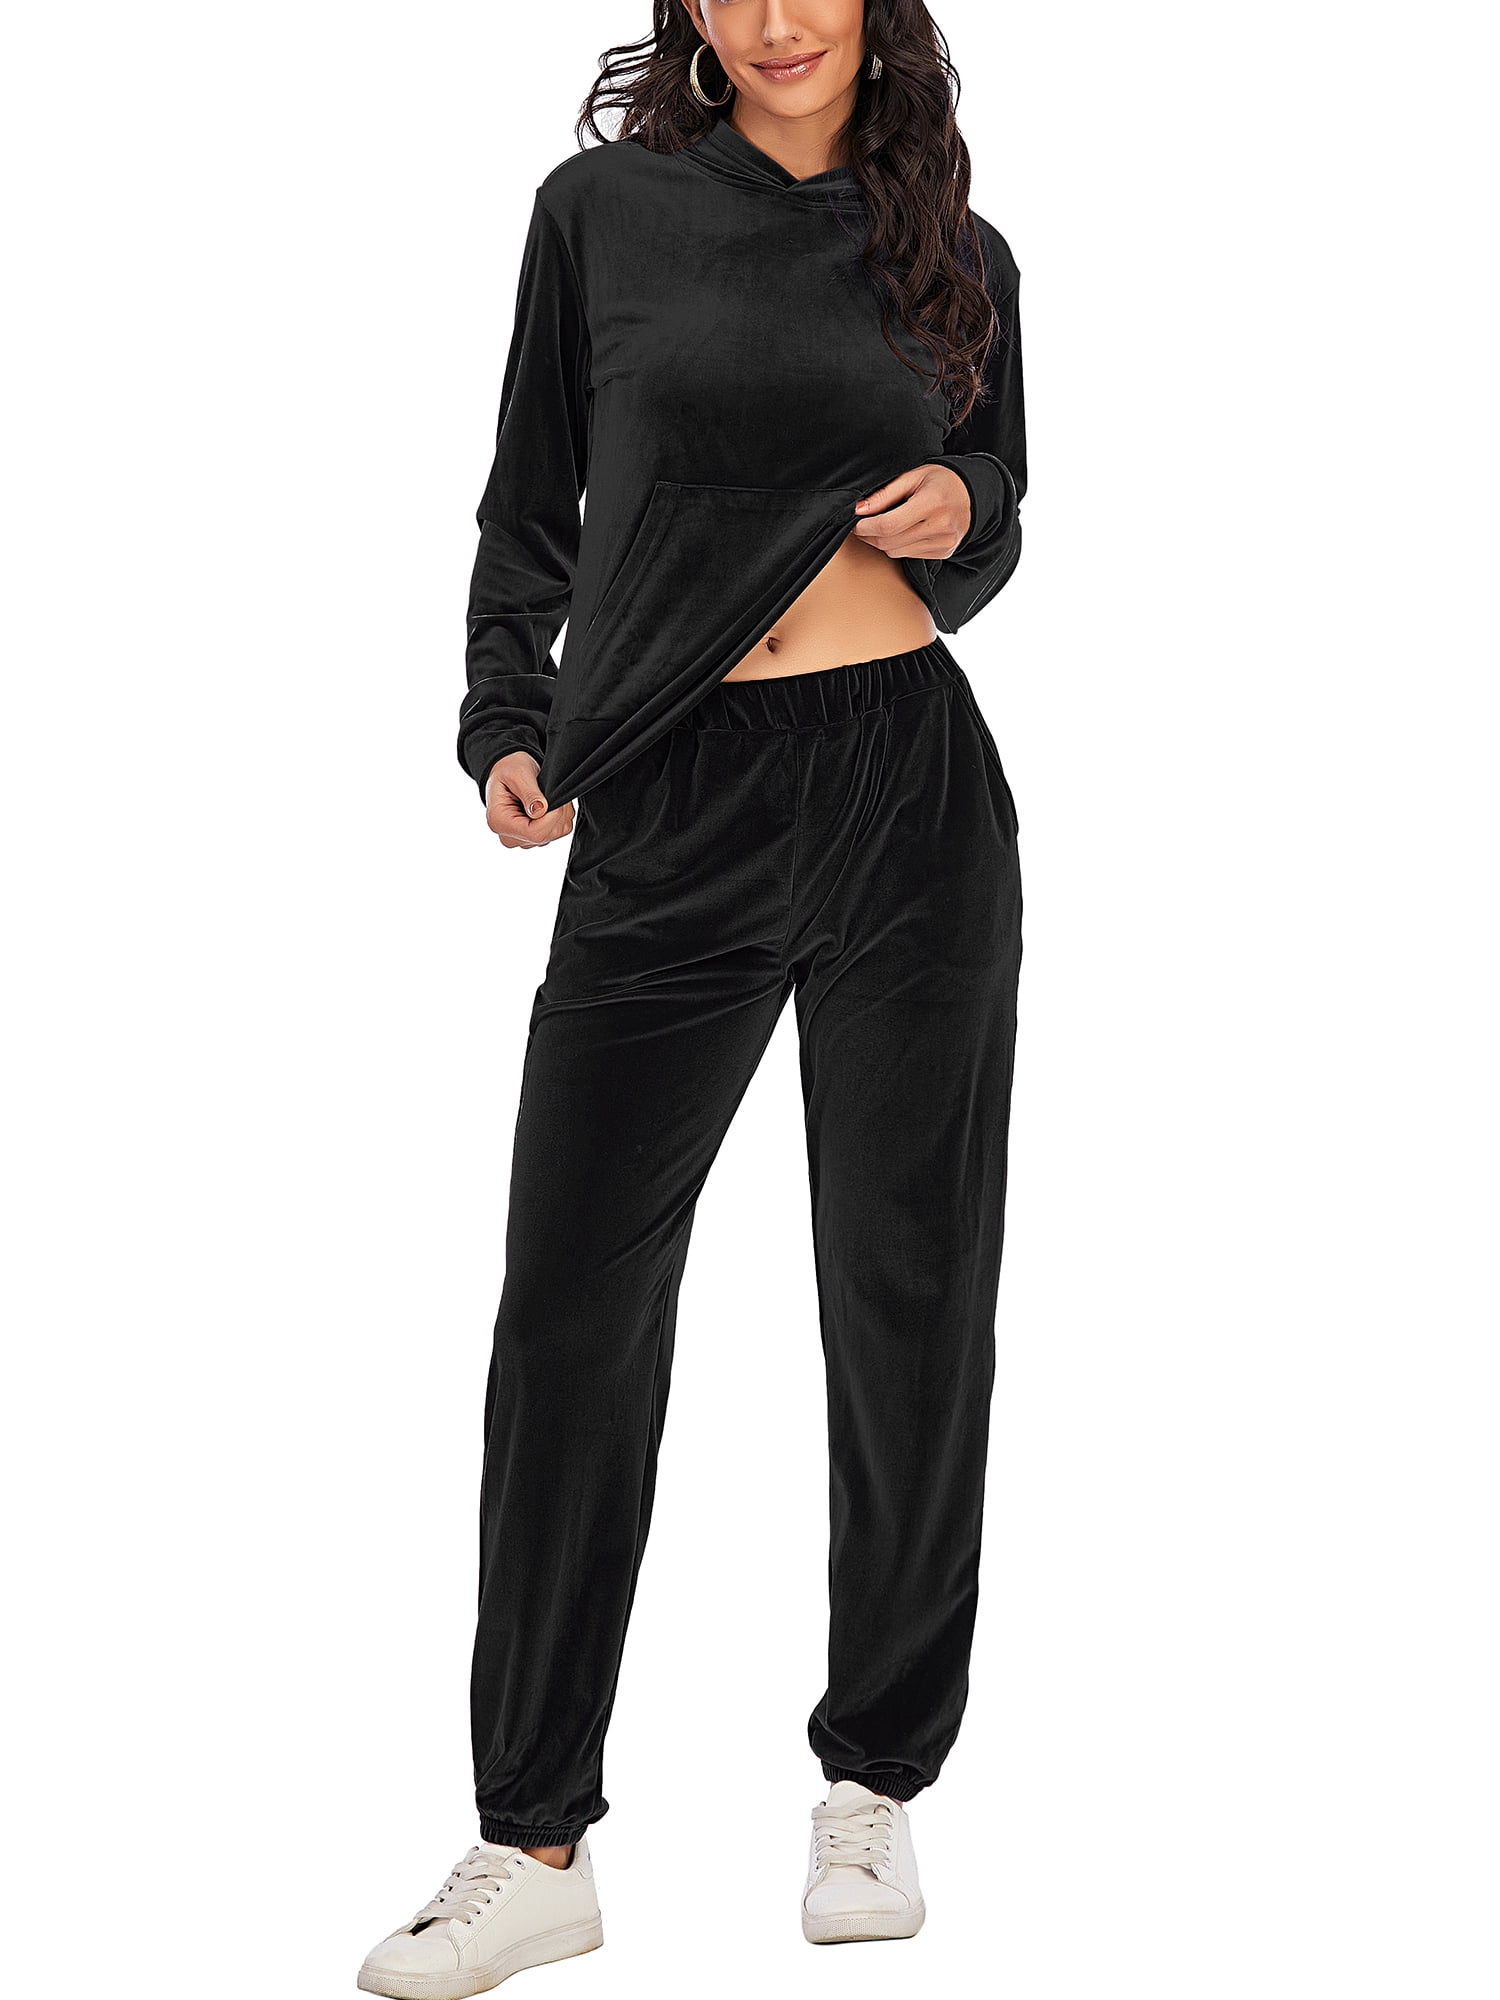 New Women Ladies Full Velour Tracksuit Hooded Top Bottom Trousers  Plus Size 